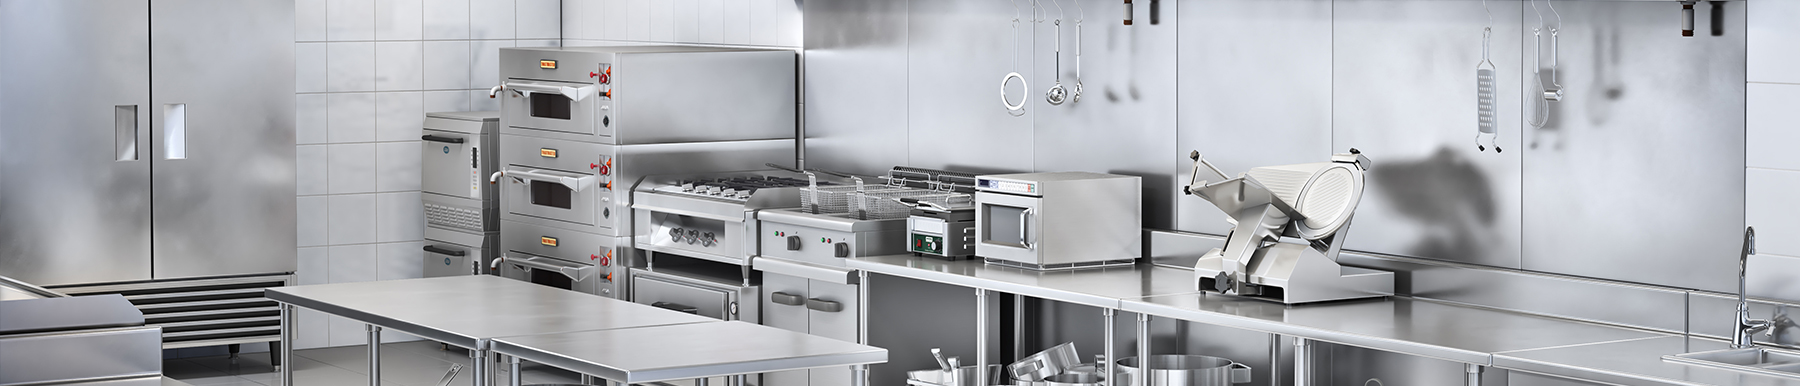 Catering Equipment Suppliers Near Torbay | H2 Catering Equipment Catering Equipment